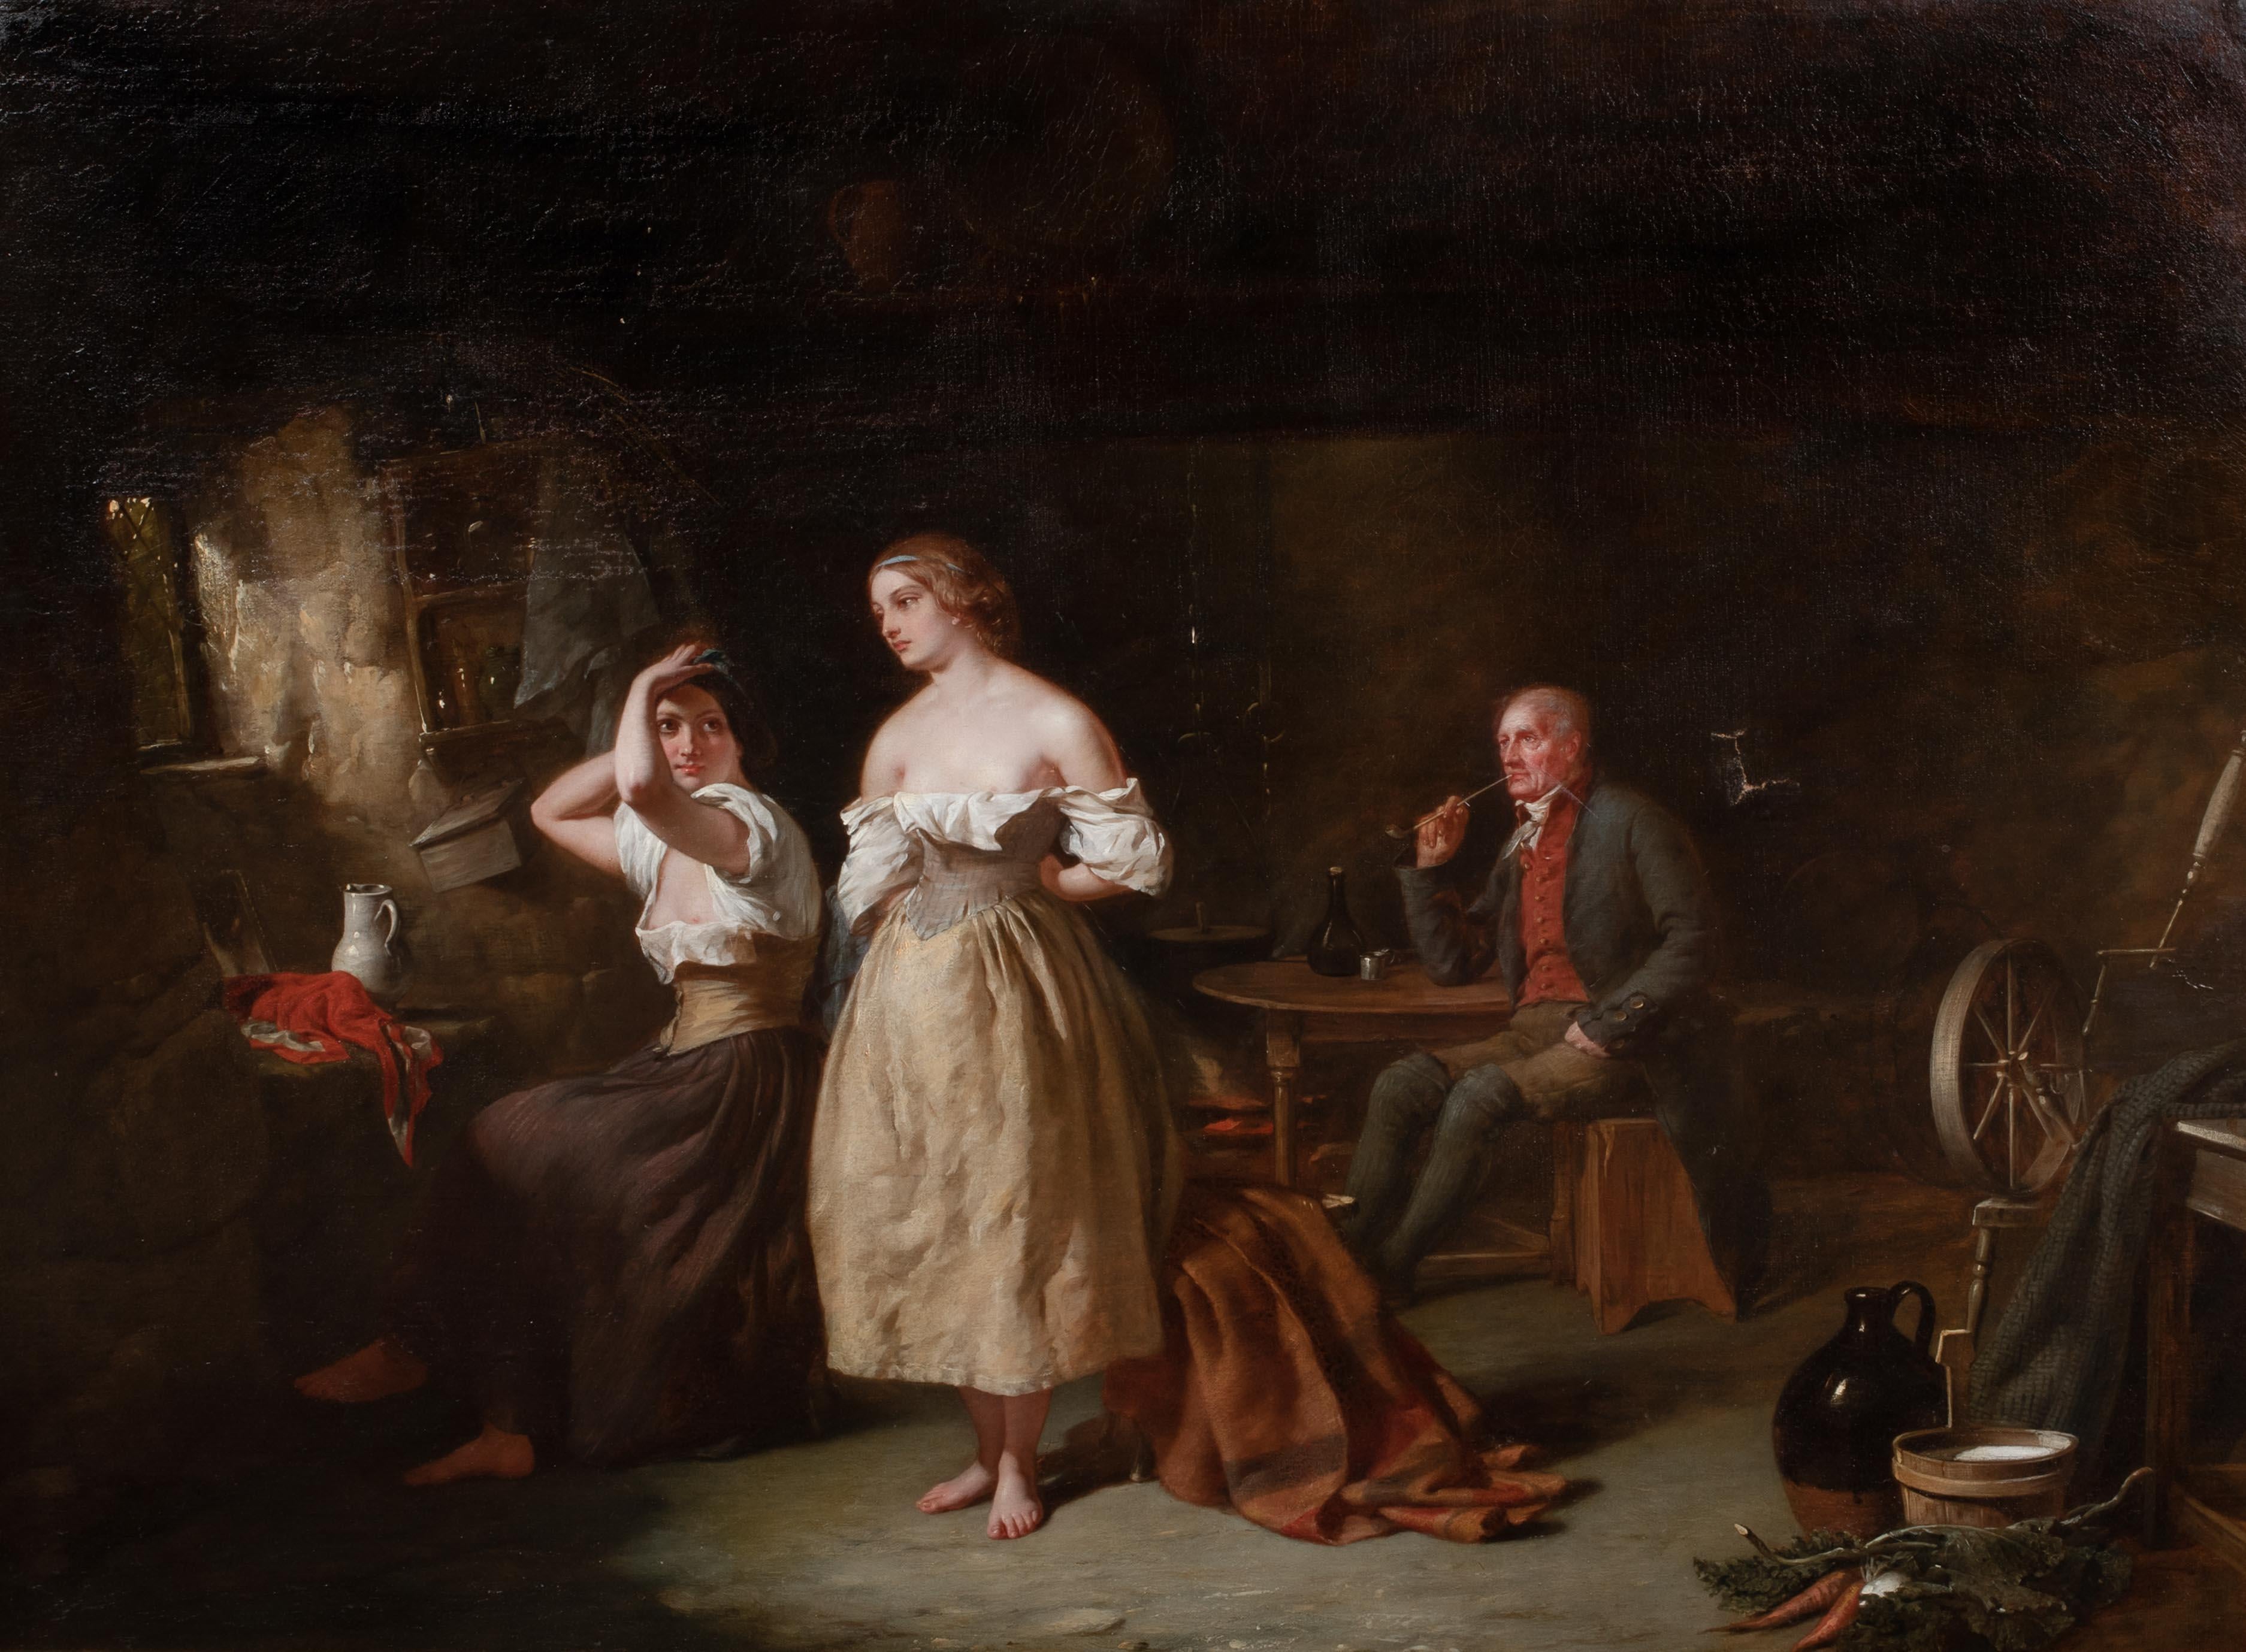 Prostitutes In A Brothel Interior, 19th Century

English School - rare subject

Large 19th Century English School interior scene of two prostitutes in a brother/bordello interior with a customer/pimp sat smoking at a table, oil on canvas.